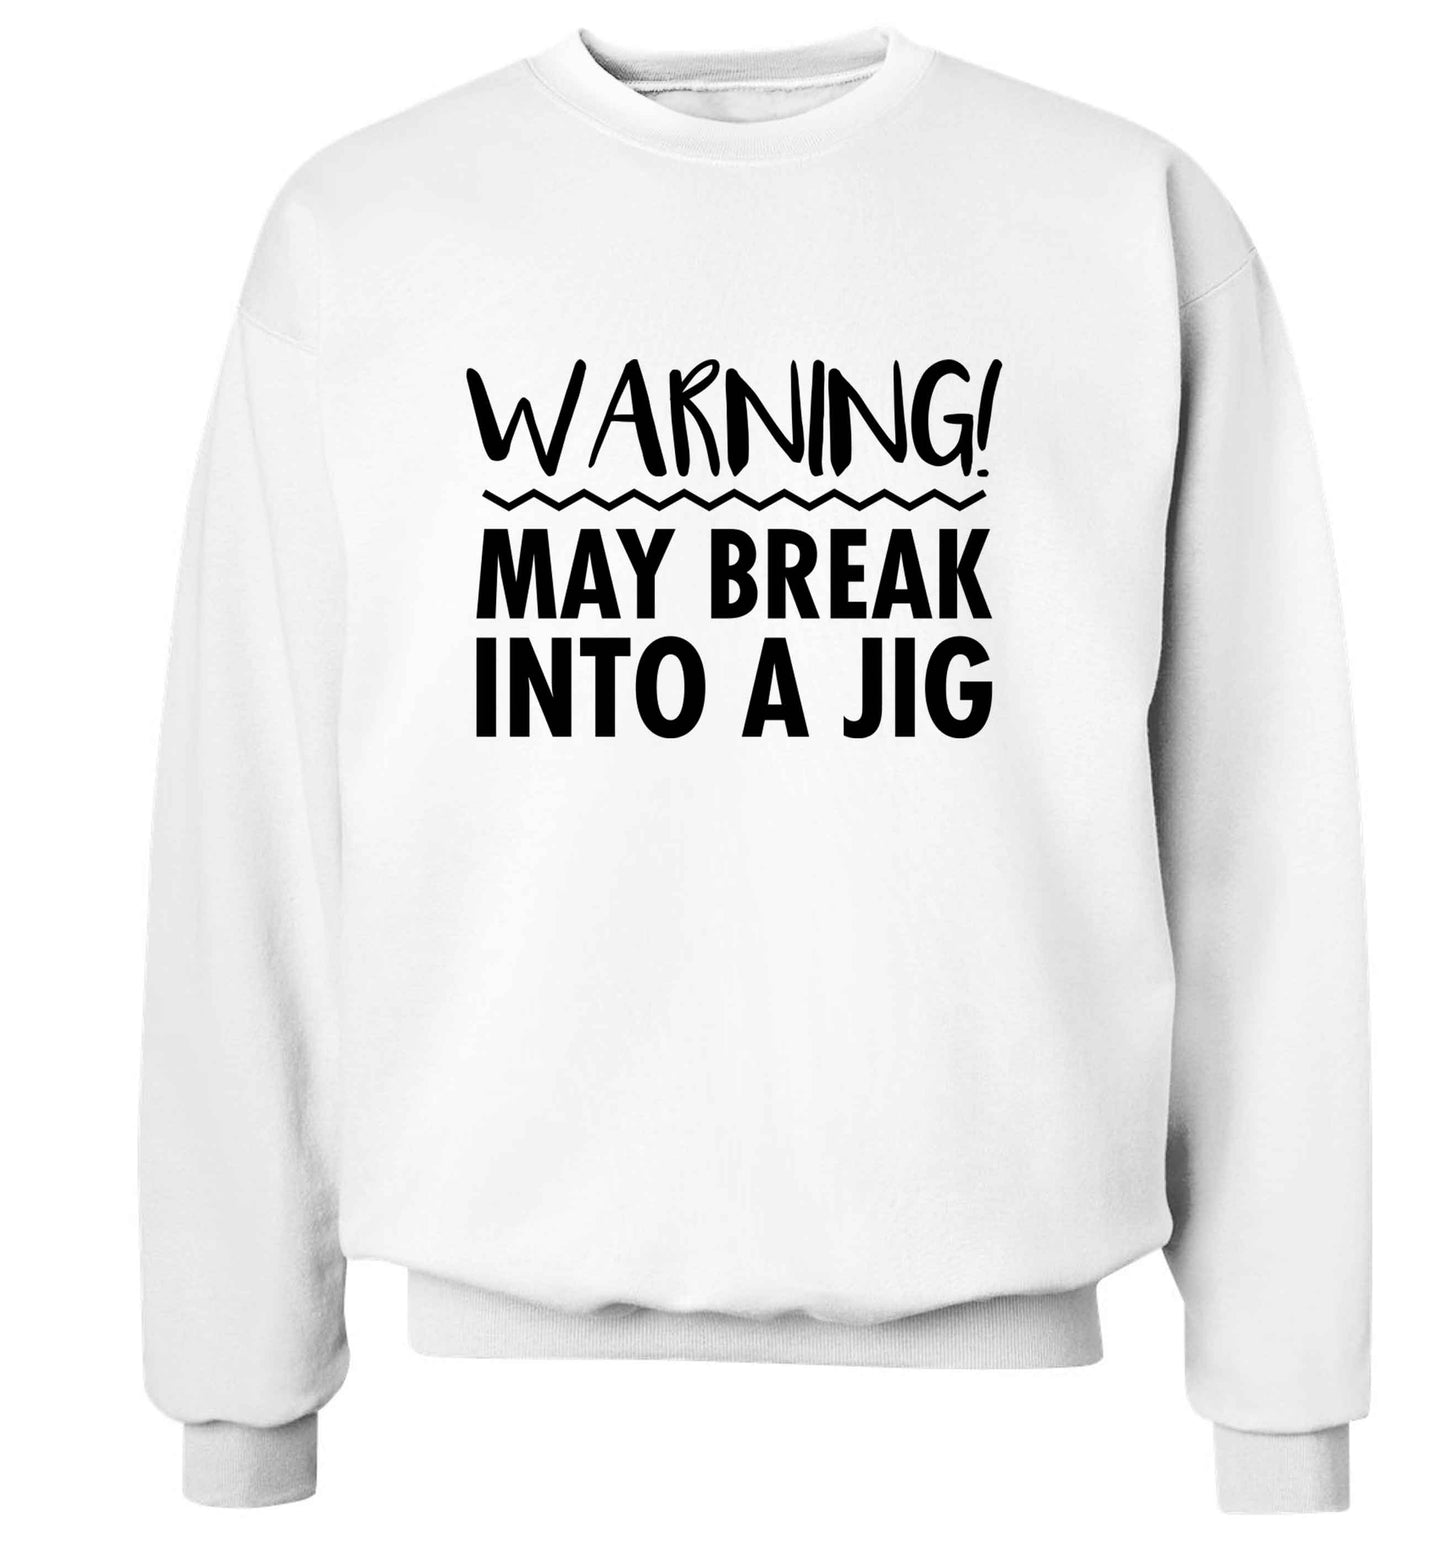 Warning may break into a jig adult's unisex white sweater 2XL